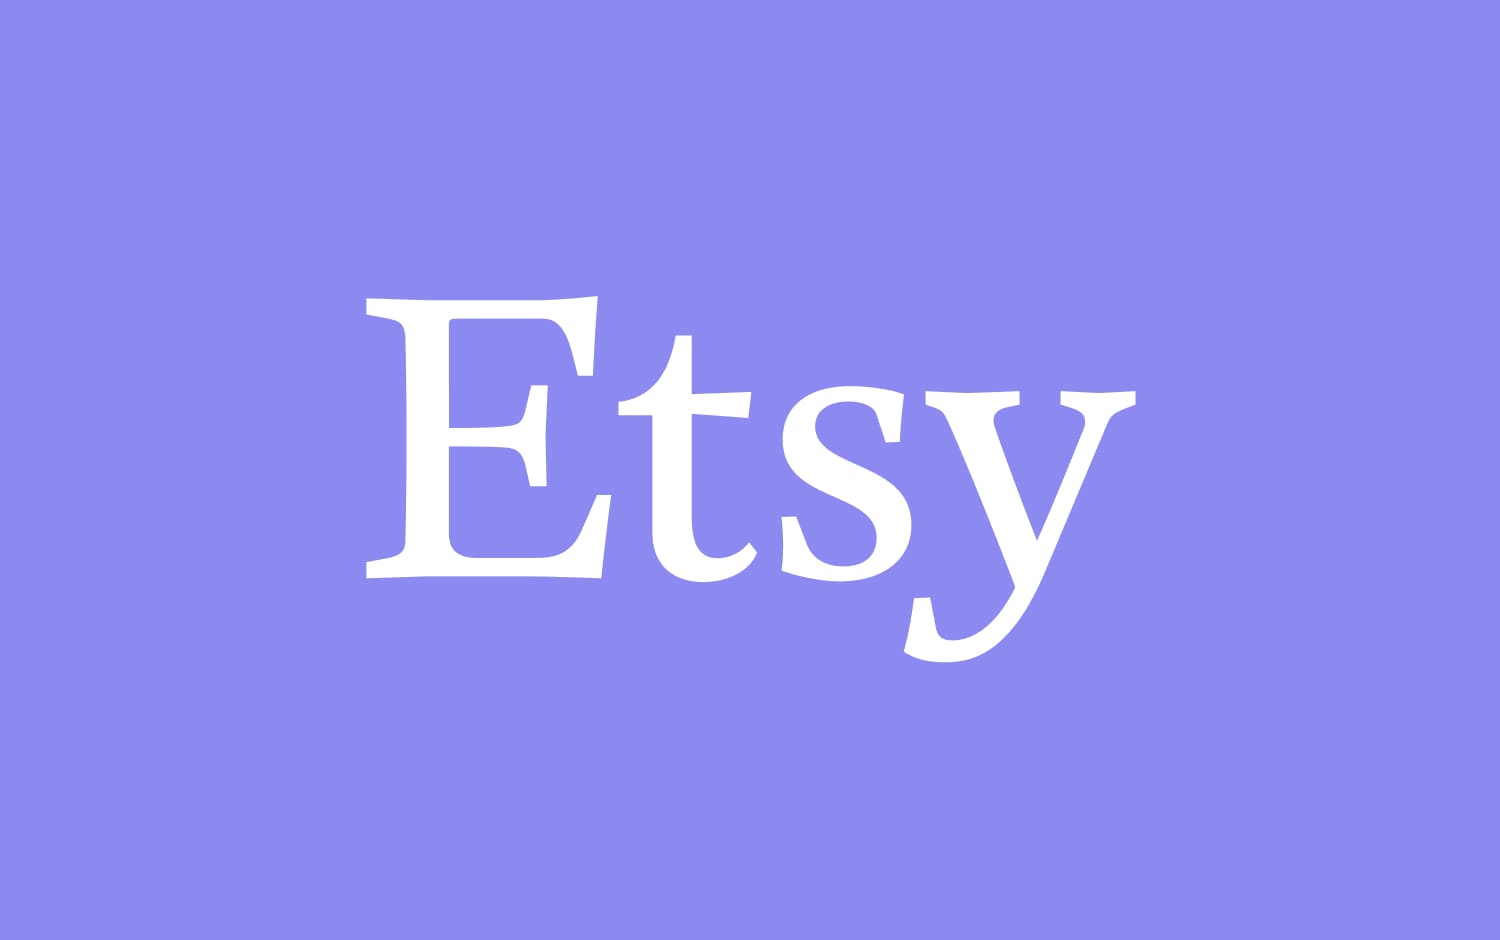 Etsy logo with white font on a lavender background